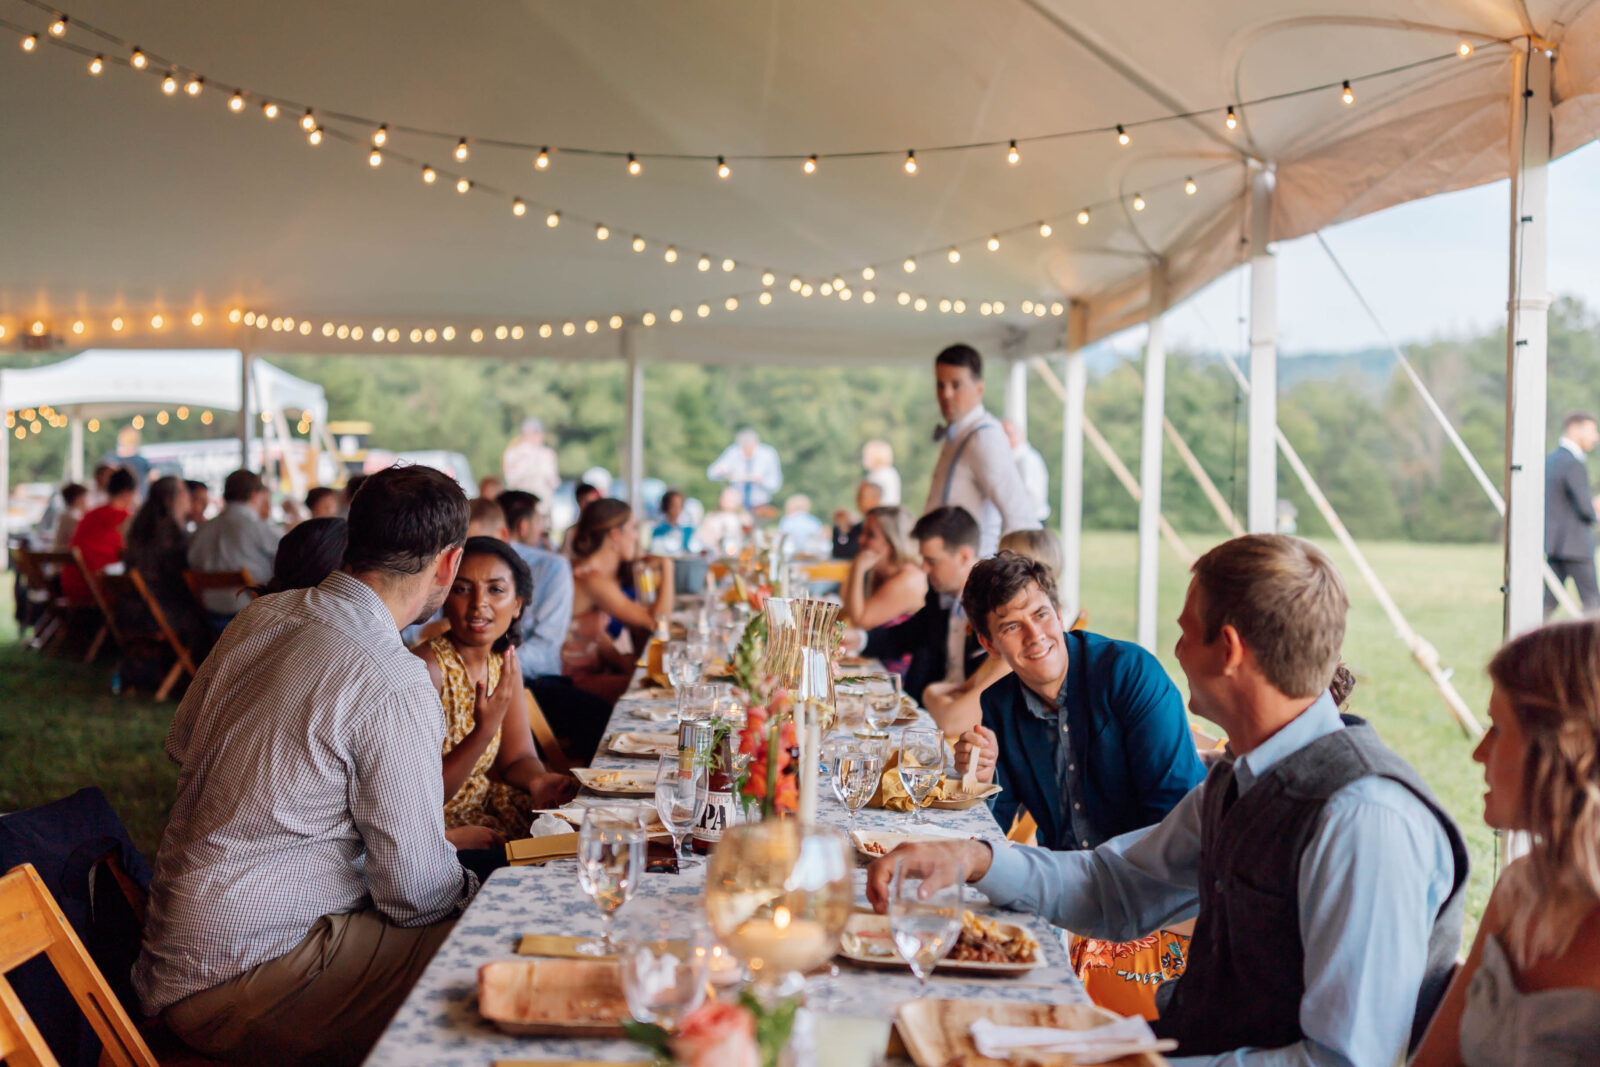 Romantic wedding reception dinner lighting and ambiance in the mountains of virginia